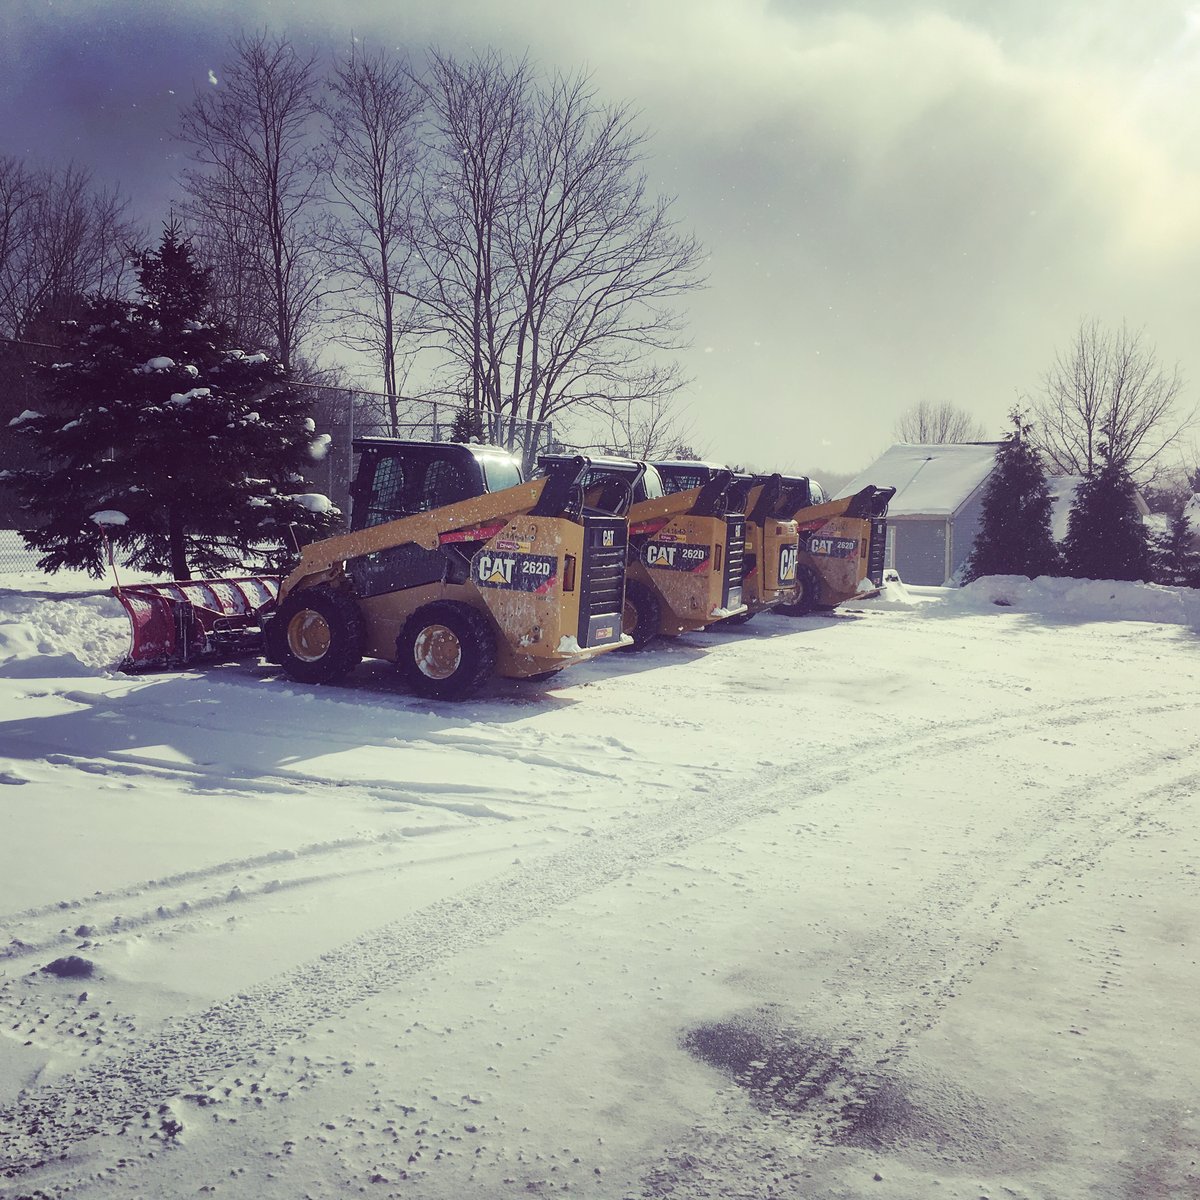 skid loaders parked in snowy parking lot